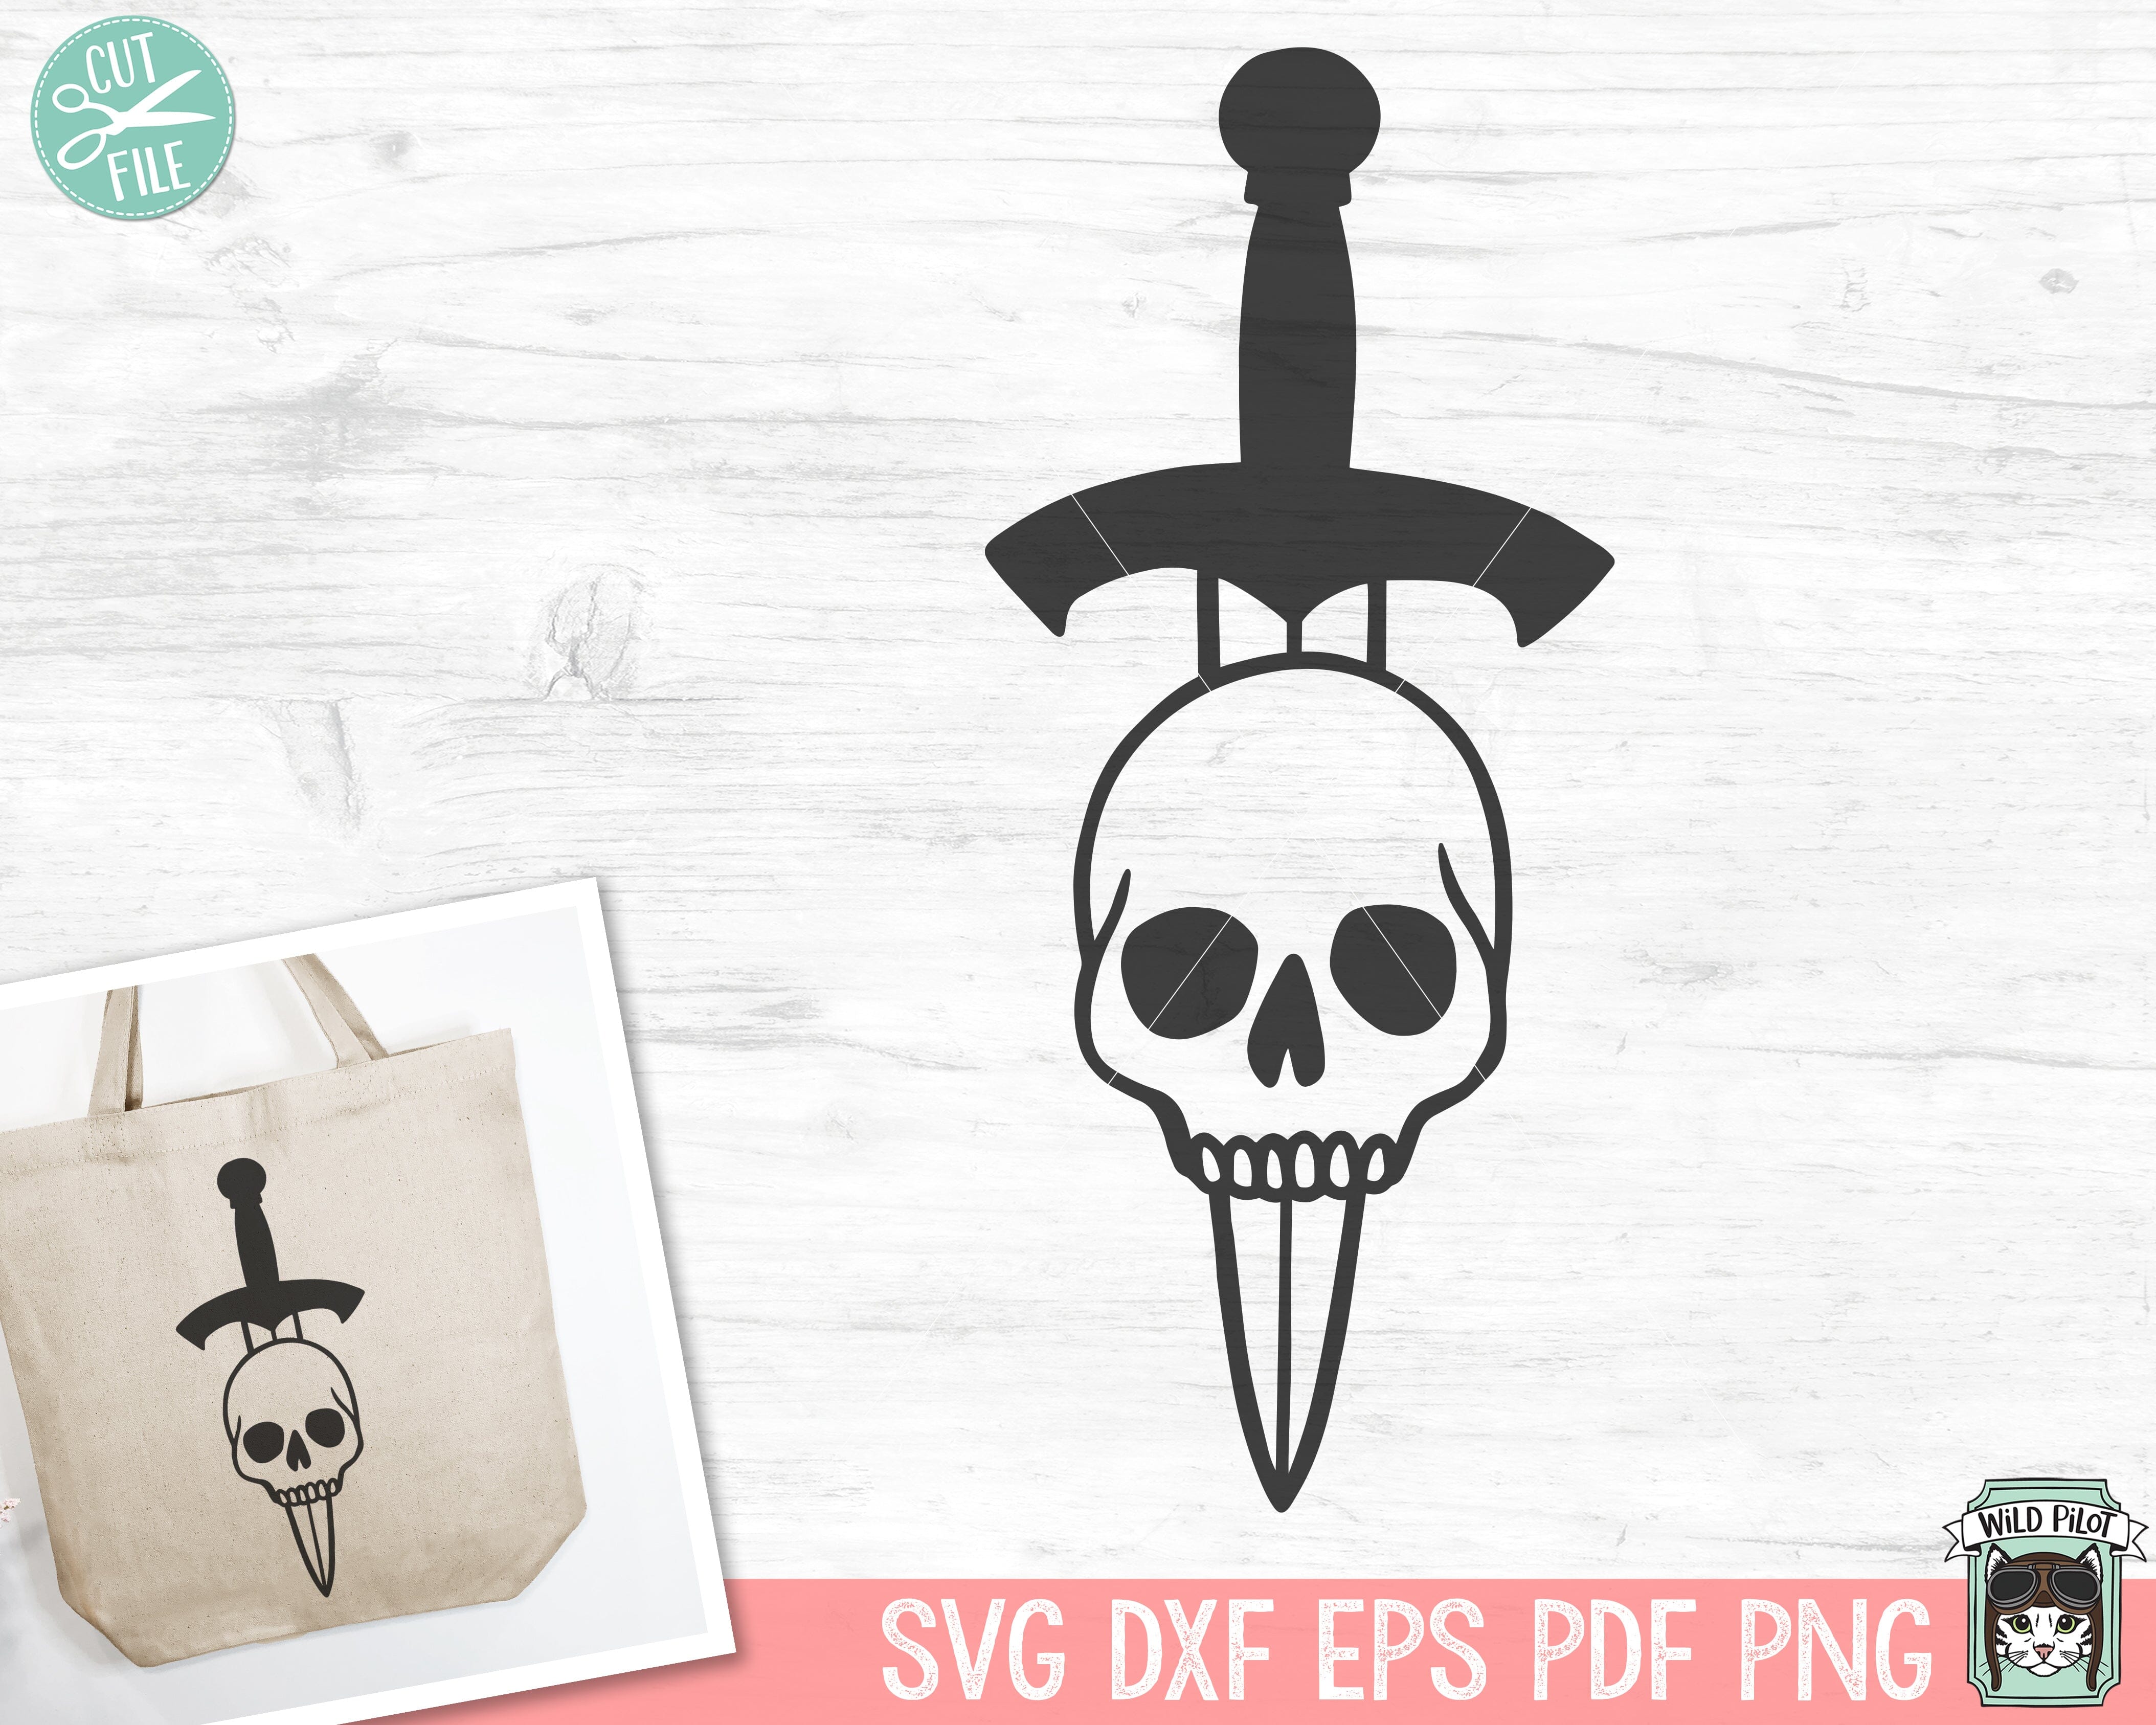 cup clipart png dagger